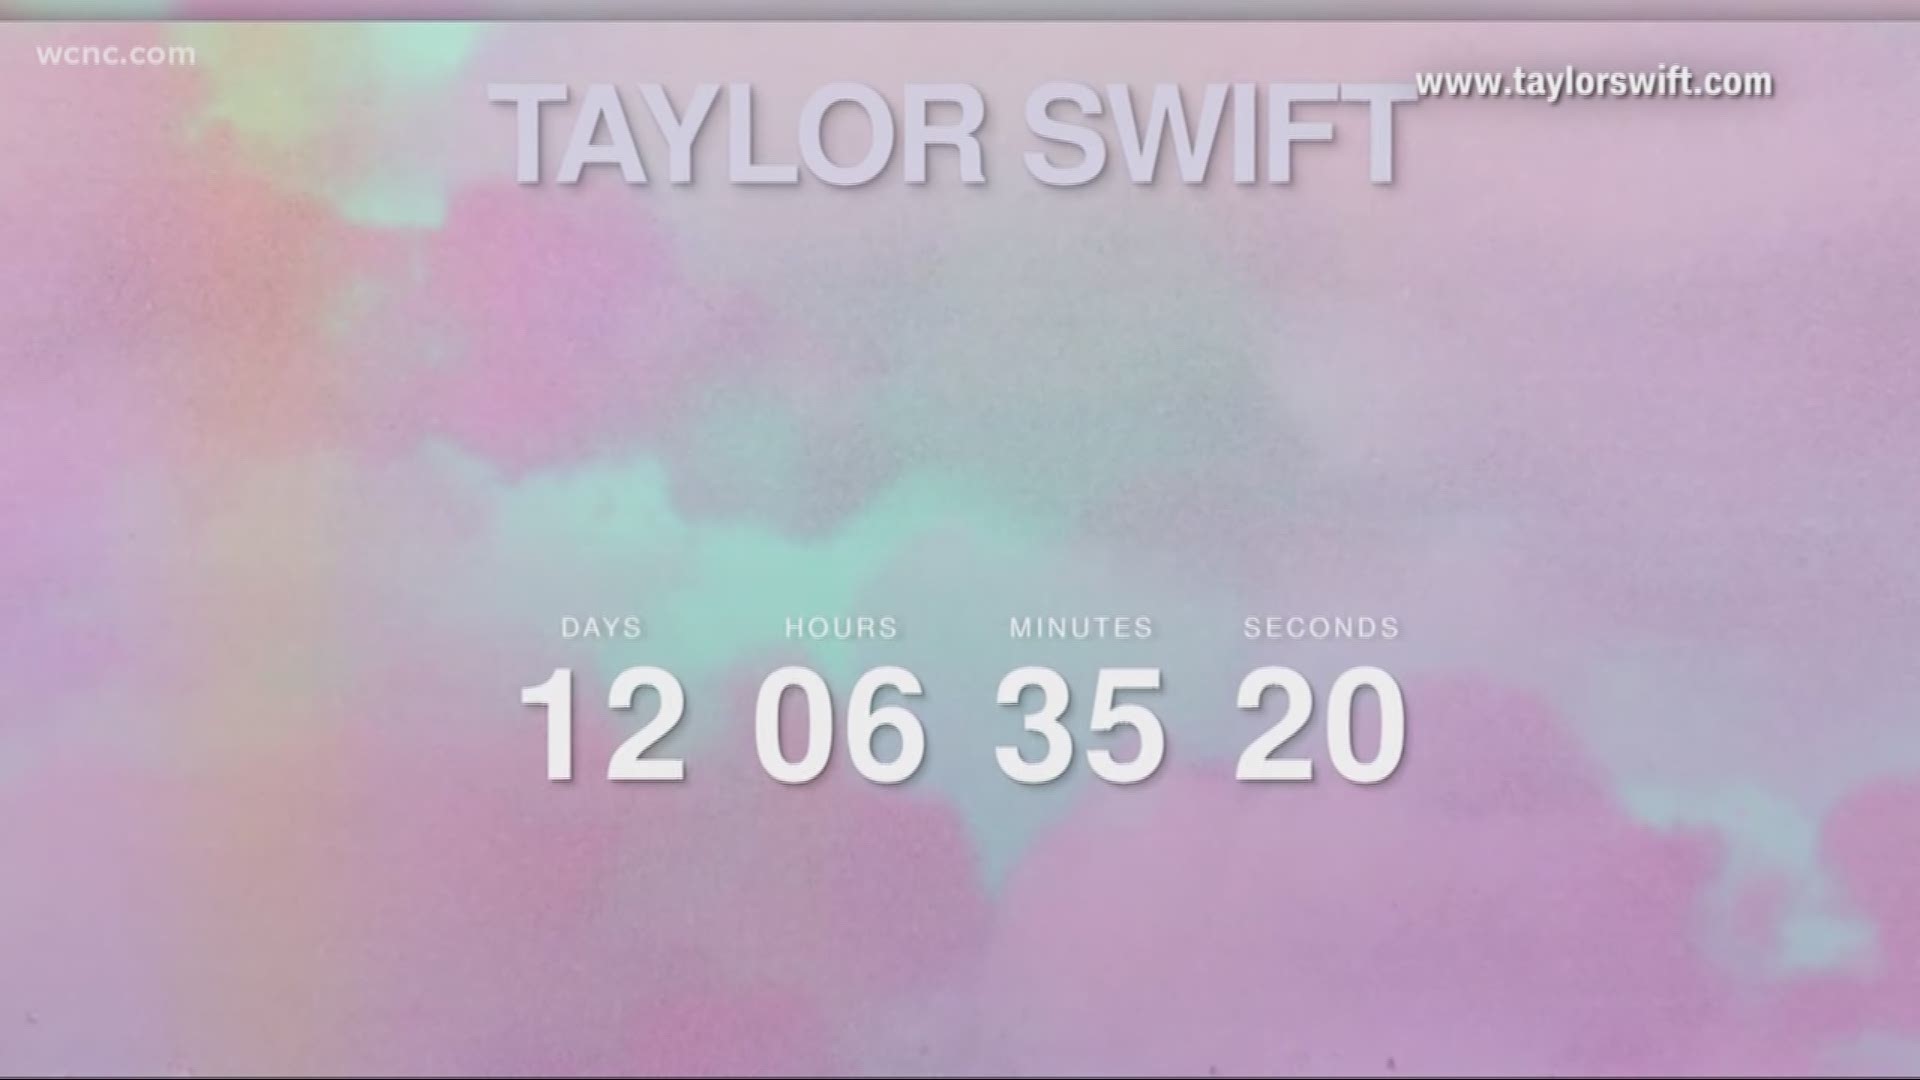 Fans can't stop speculating what Taylor Swift is up to after the star posted a cryptic countdown on her website. Is it new music? We'll find out what Taylor's up to on April 26.